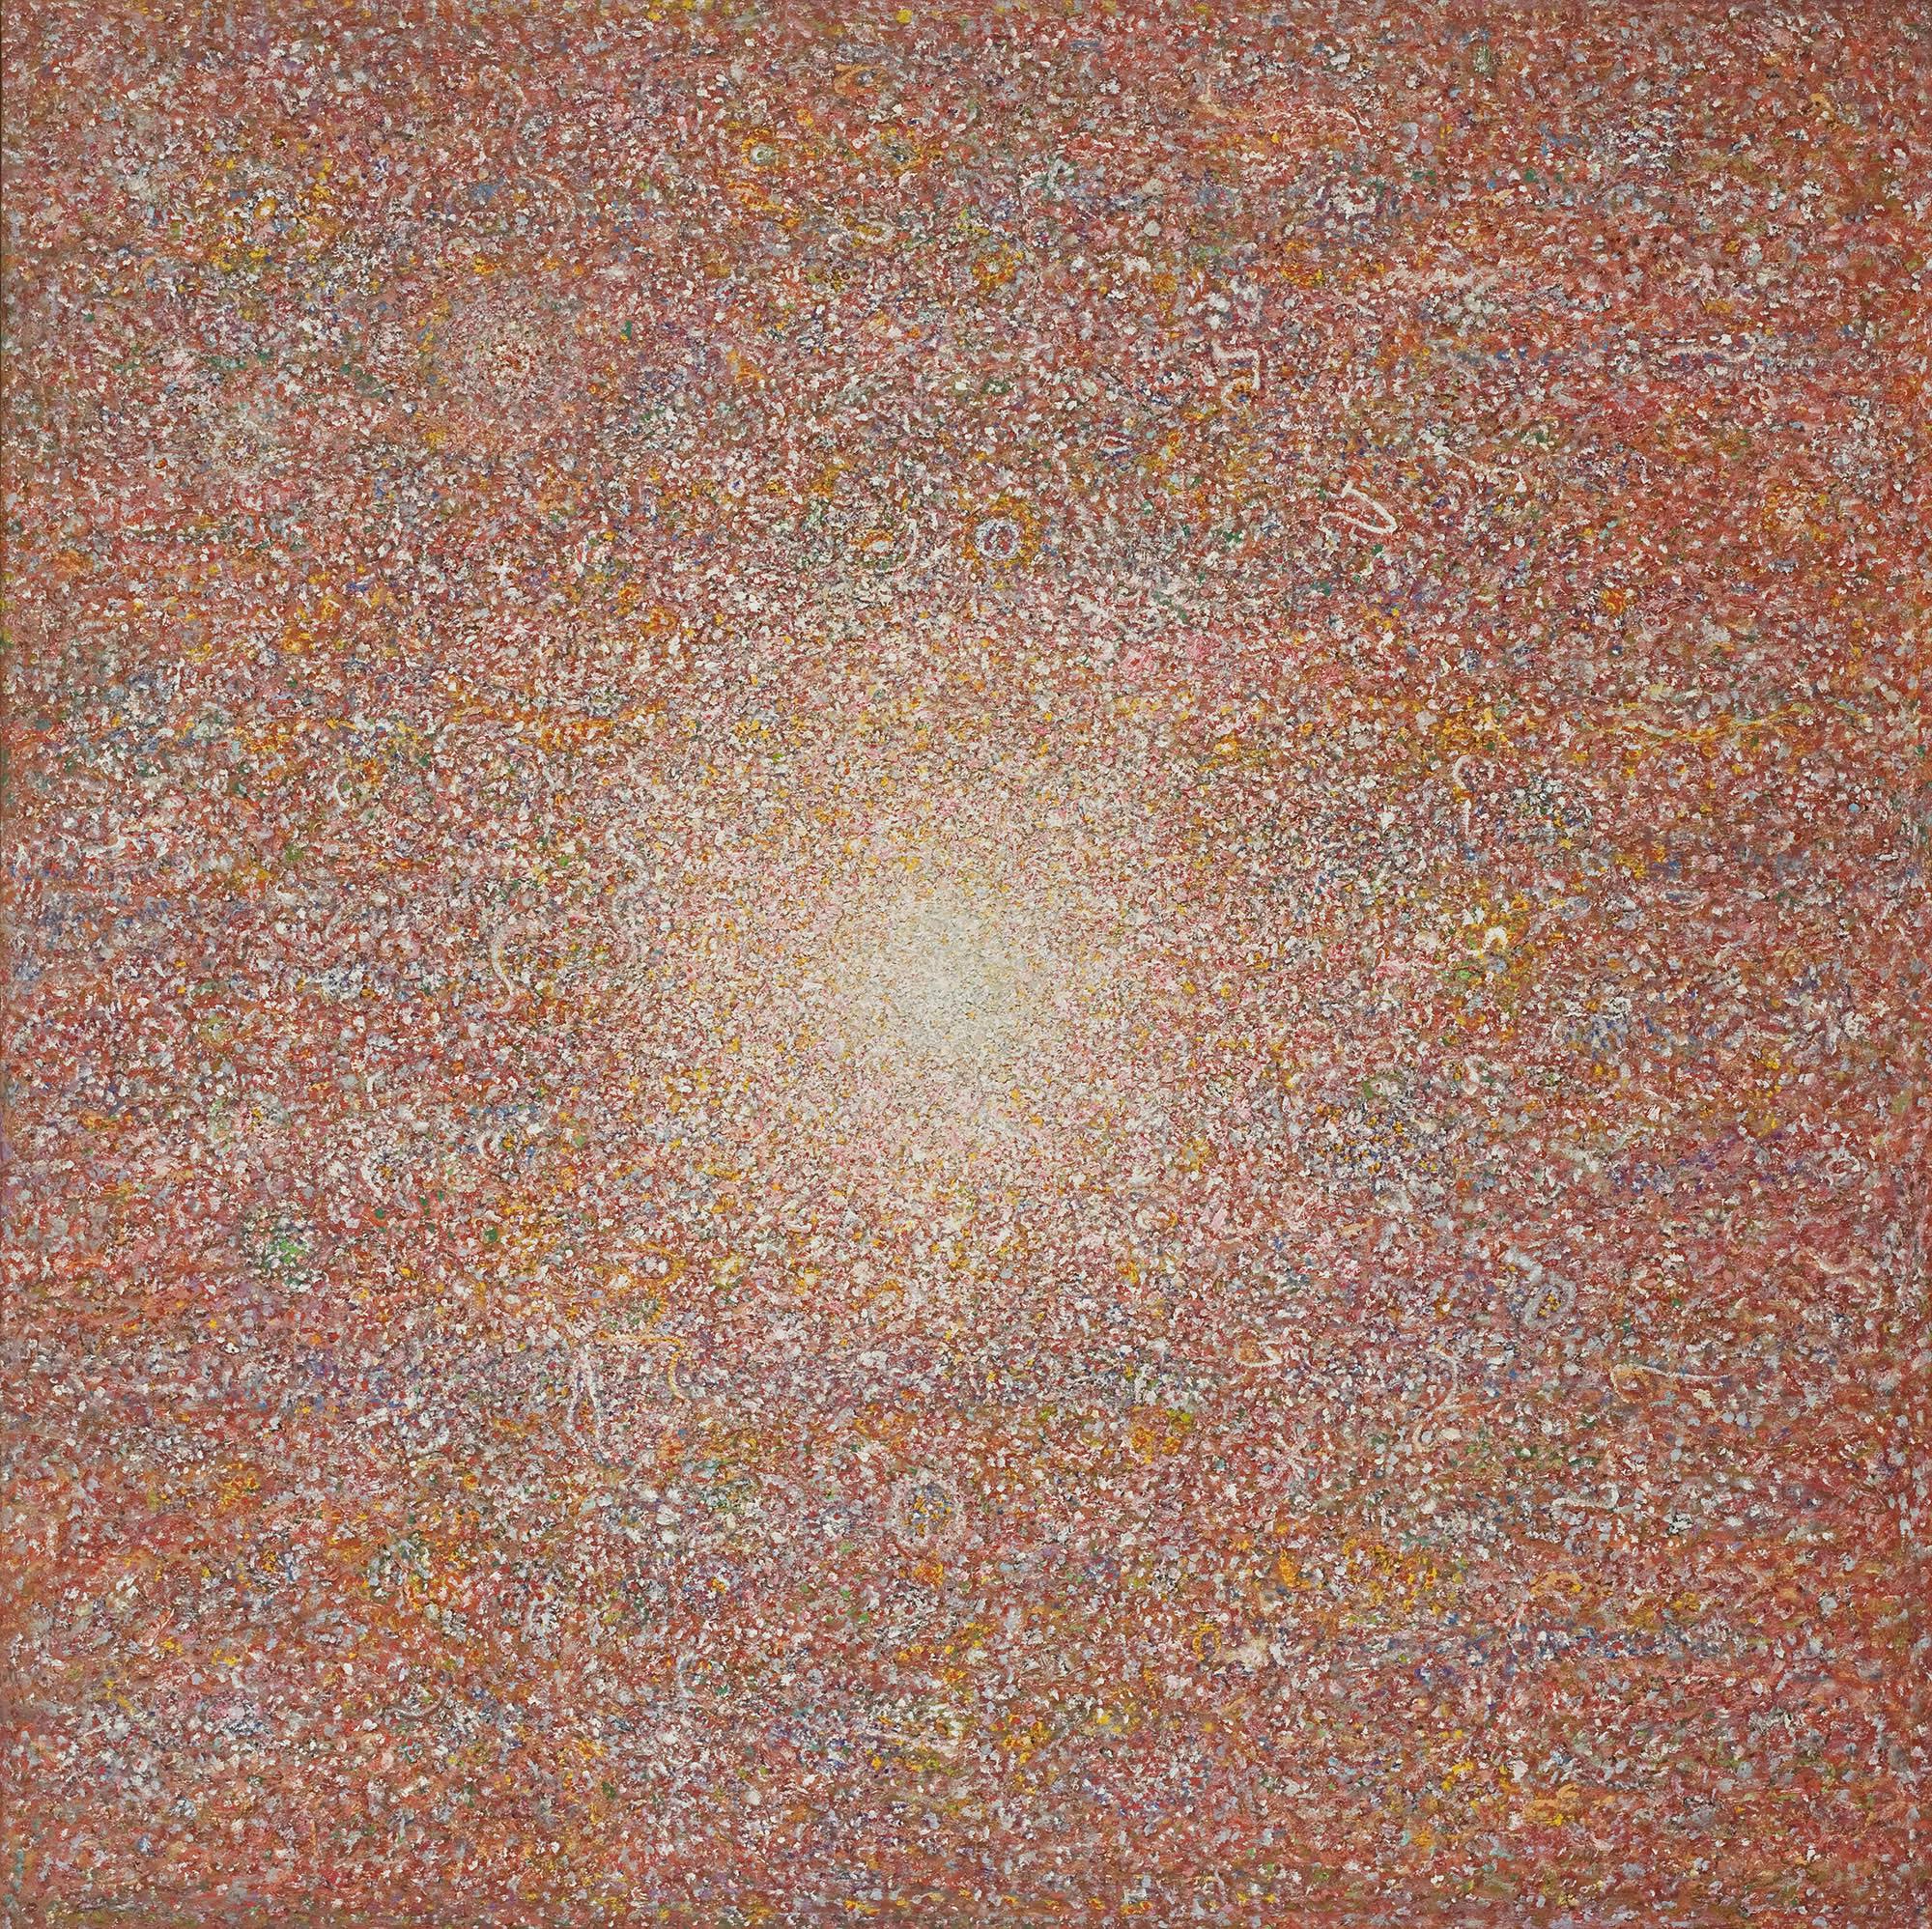 _Transcendent Presence,_ 1966–67, oil on canvas, 61 x 61 in. (154.9 x 154.9 cm).  Grand Rapids Art Museum, Michigan, Gift of the Estate of Helen Burke (2005.2)
 – The Richard Pousette-Dart Foundation